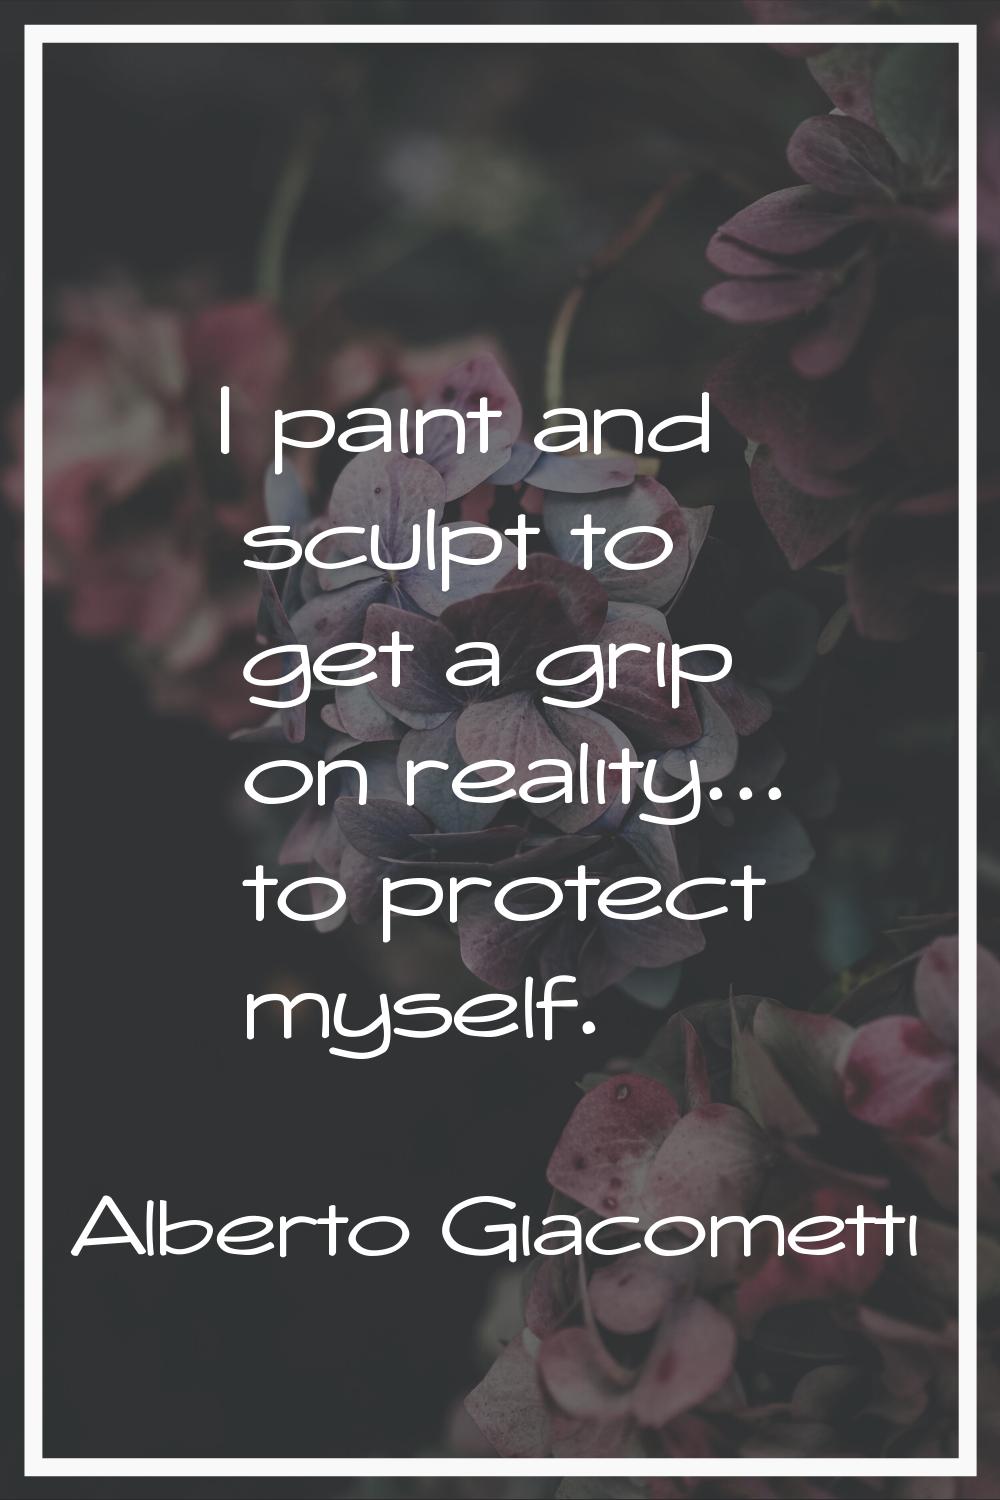 I paint and sculpt to get a grip on reality... to protect myself.